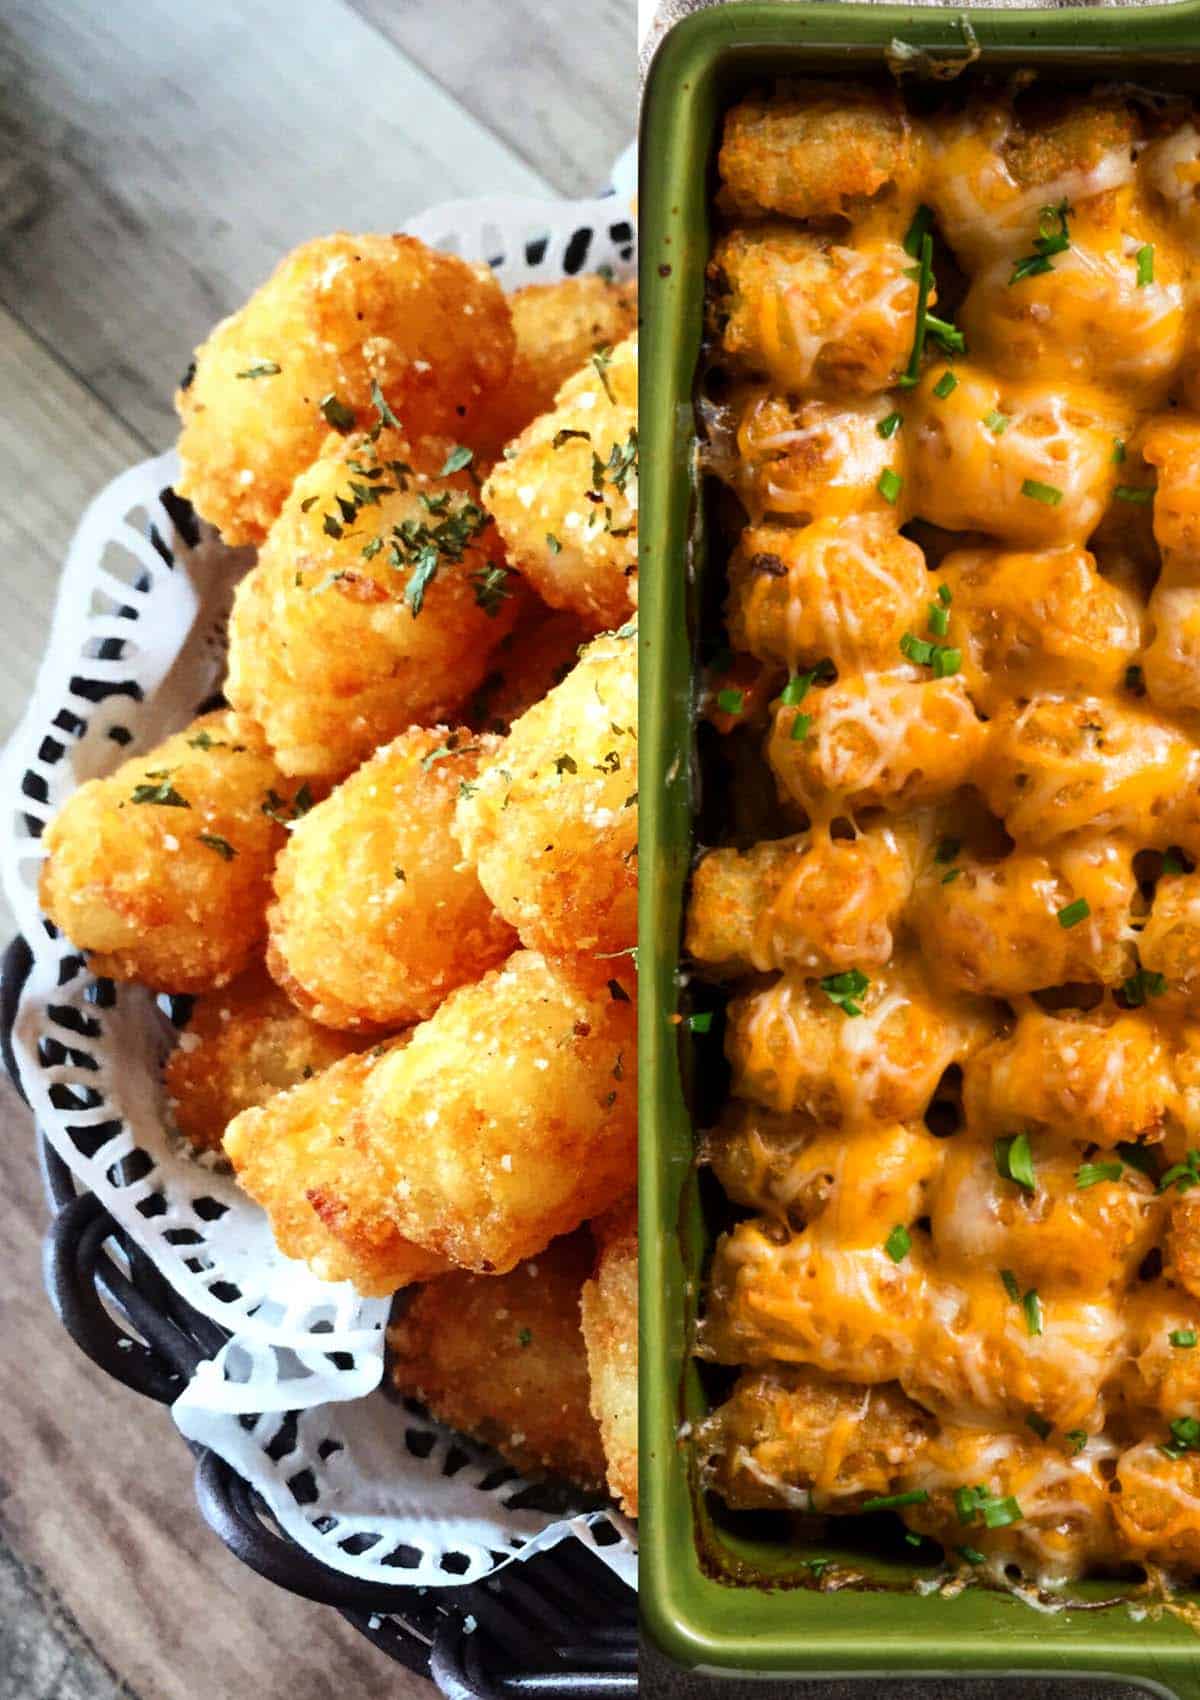 The crispy Tater Tots and creamy sauce make for a delicious and satisfying meal that will surely be a hit with everyone. Plus, it's a great option for feeding a large group of people, whether for a potluck or a family gathering.